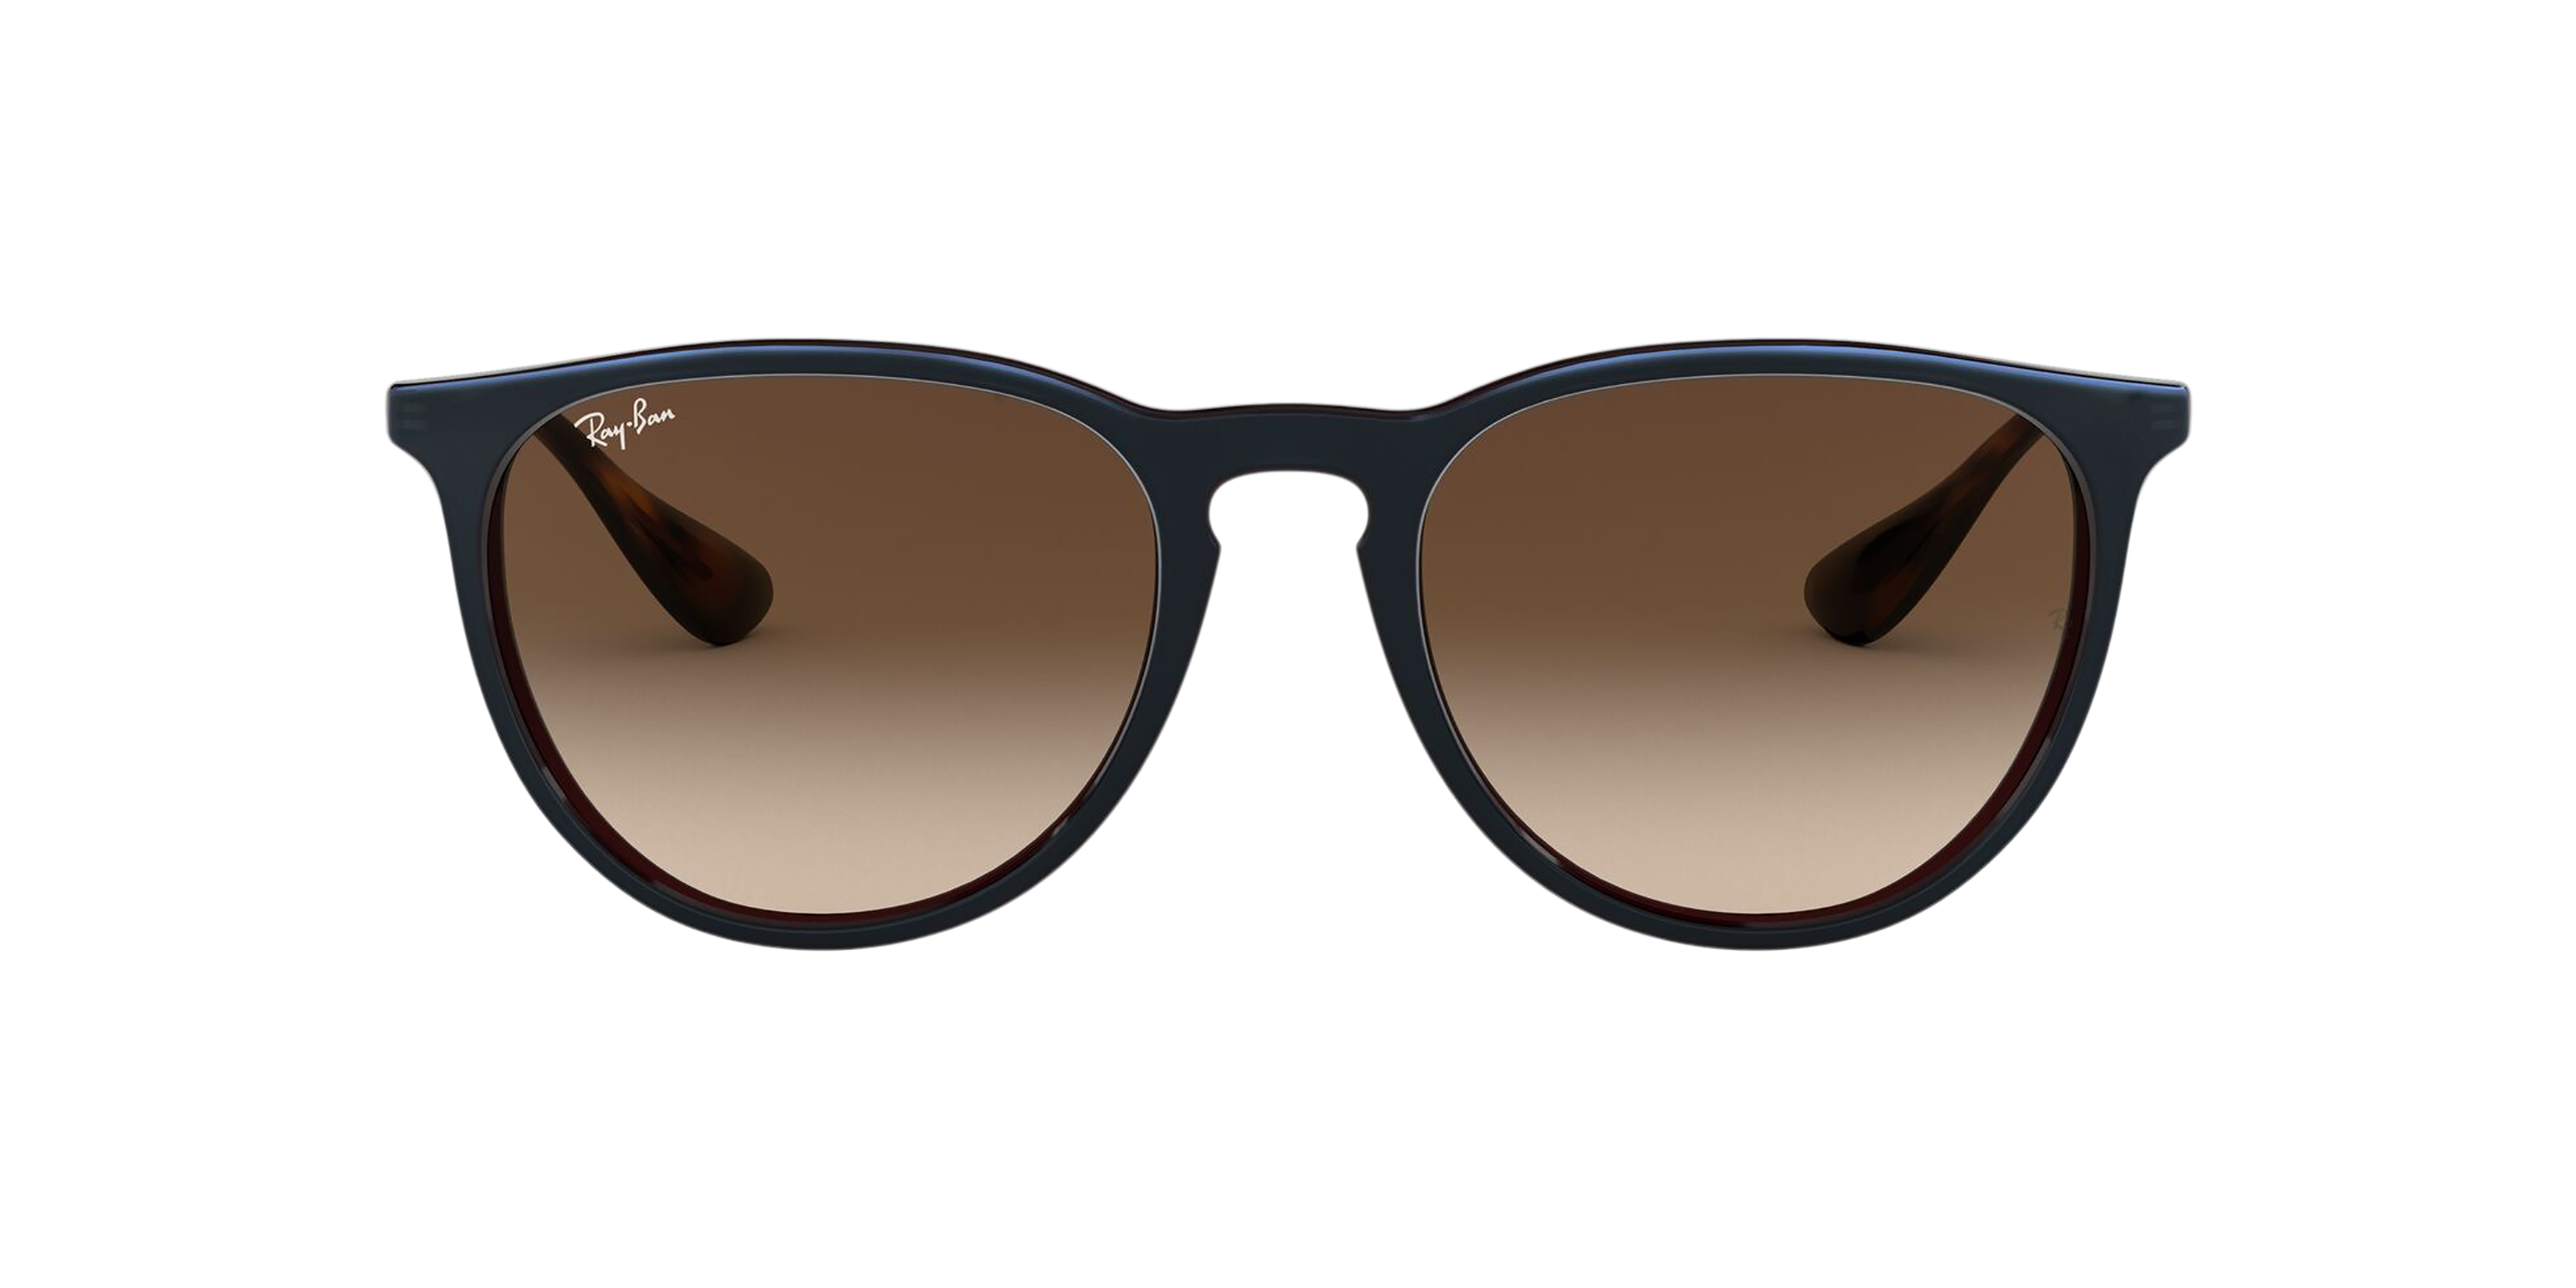 [products.image.front] Ray-Ban Erika Classic RB4171 631513